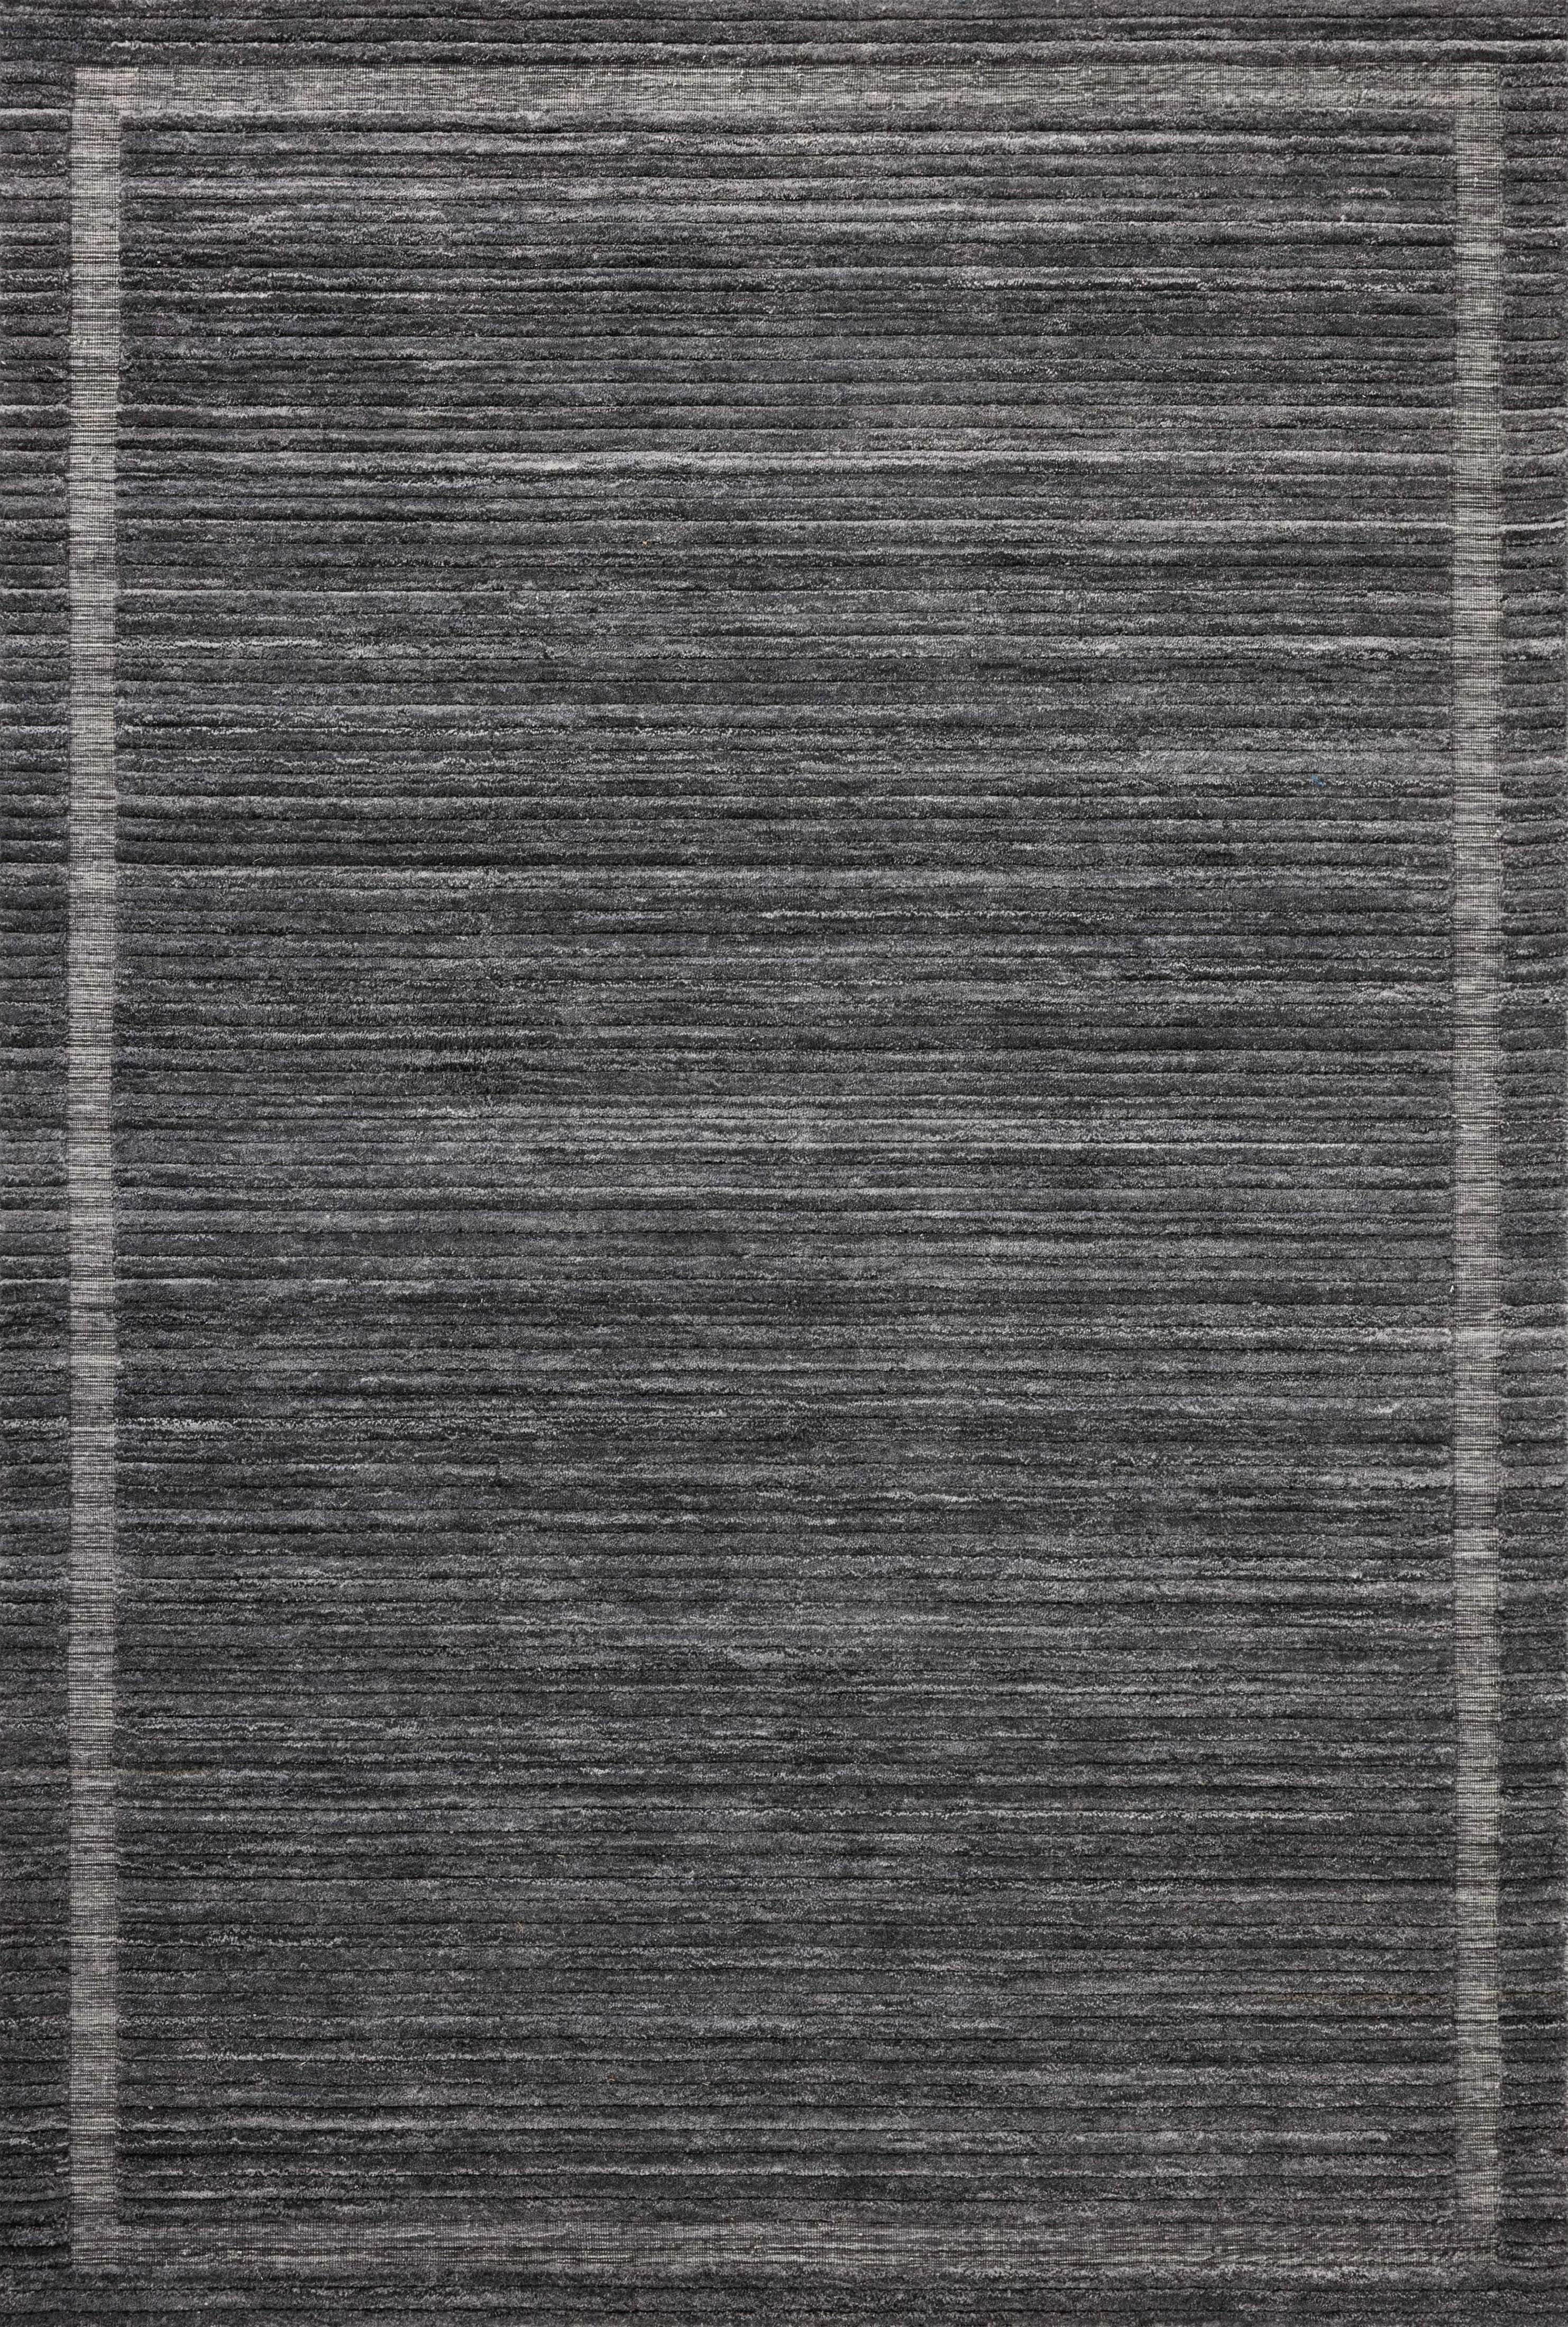 Irresistible to walk upon, the Dana Ink Rug by Brigette Romanek x Loloi has a high-low texture that alternates between a subtly shaggy pile and a soft base. Horizontal broken stripes give the area rug a fresh and energized structure, while a finish of fringe along the edges accentuates its sense of movement. Amethyst Home provides interior design, new home construction design consulting, vintage area rugs, and lighting in the San Diego metro area.